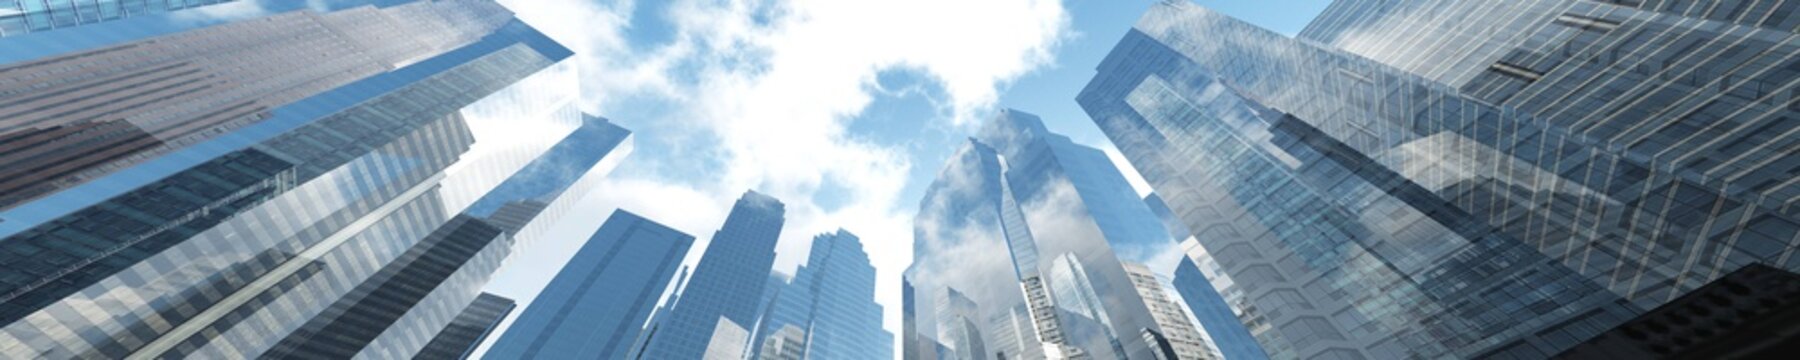 Skyscrapers among the clouds, 3D rendering